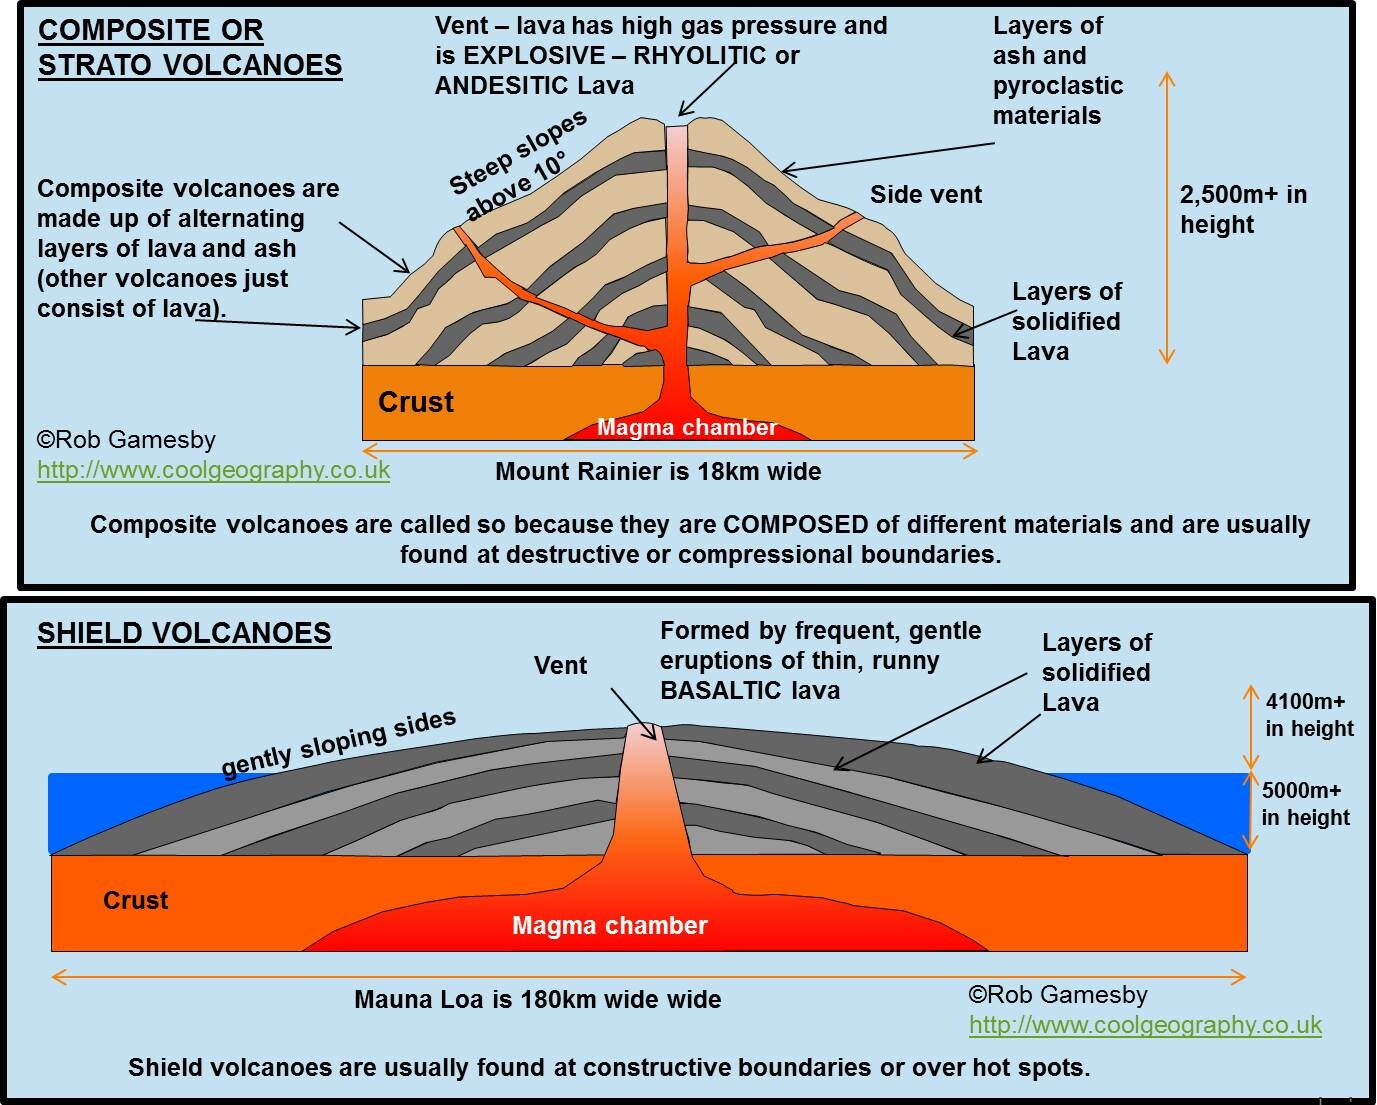  changes to extrusive volcanic features